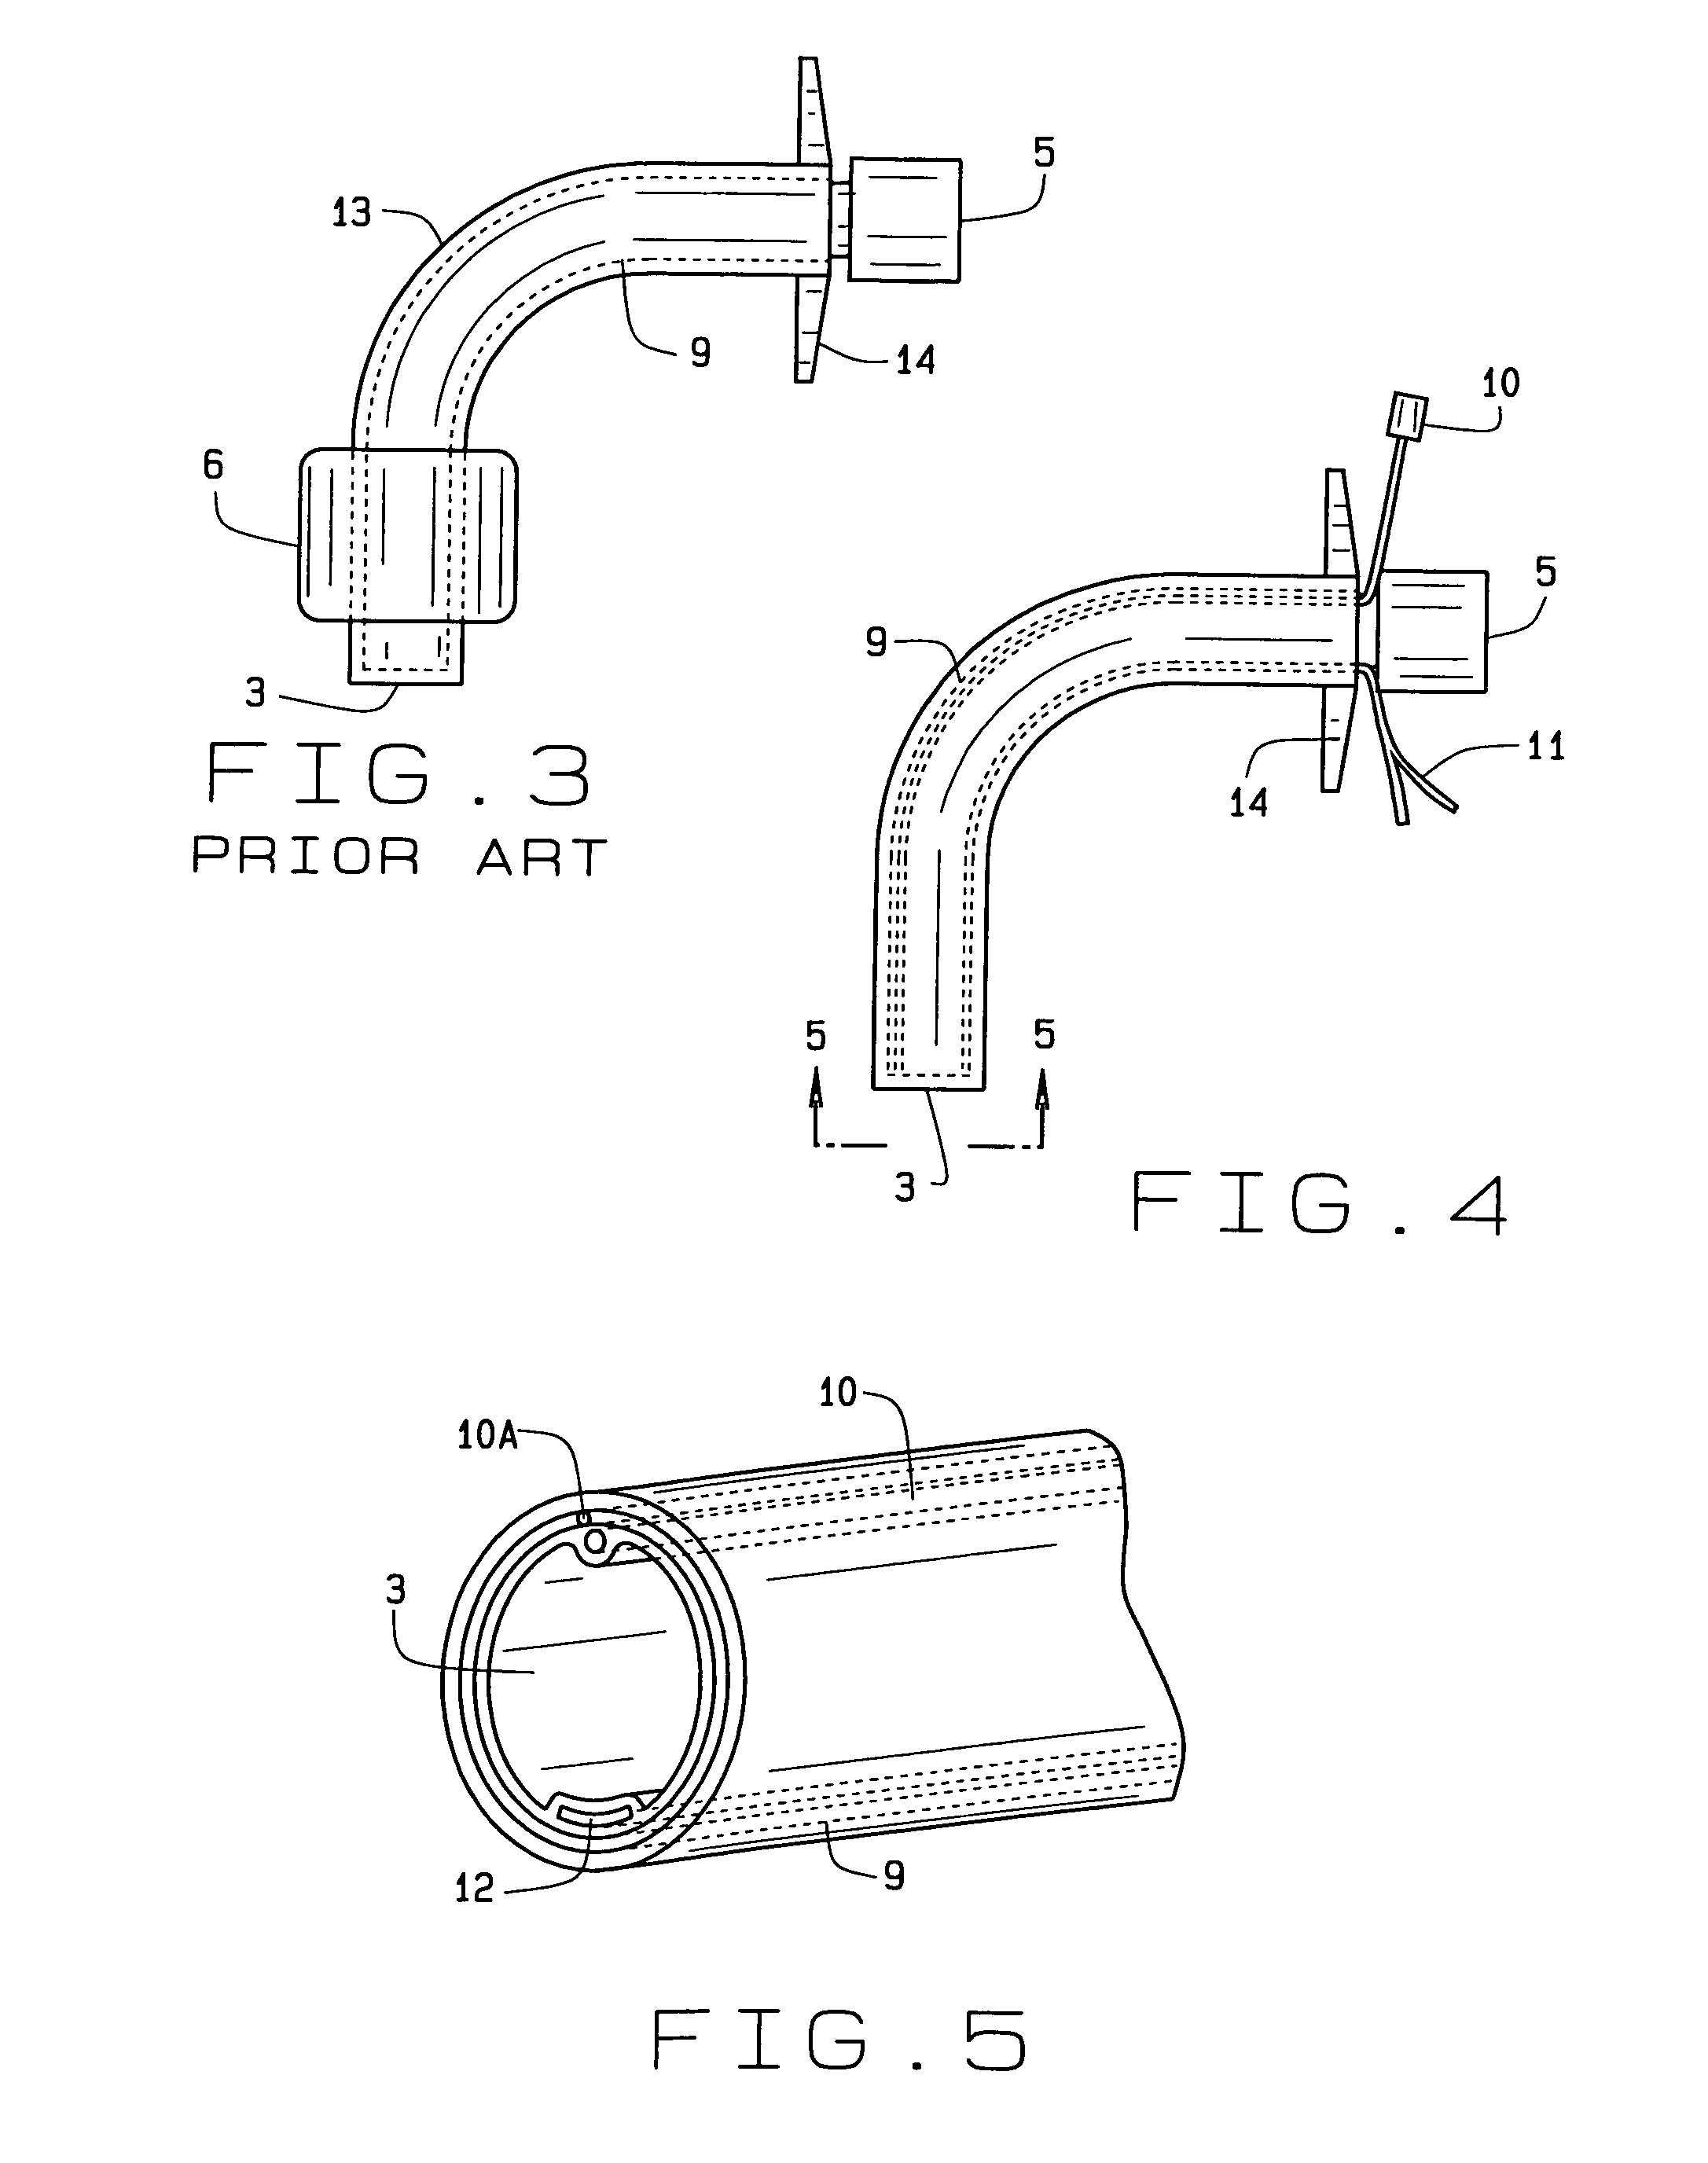 Tubular device delivering light and radiation into a patient